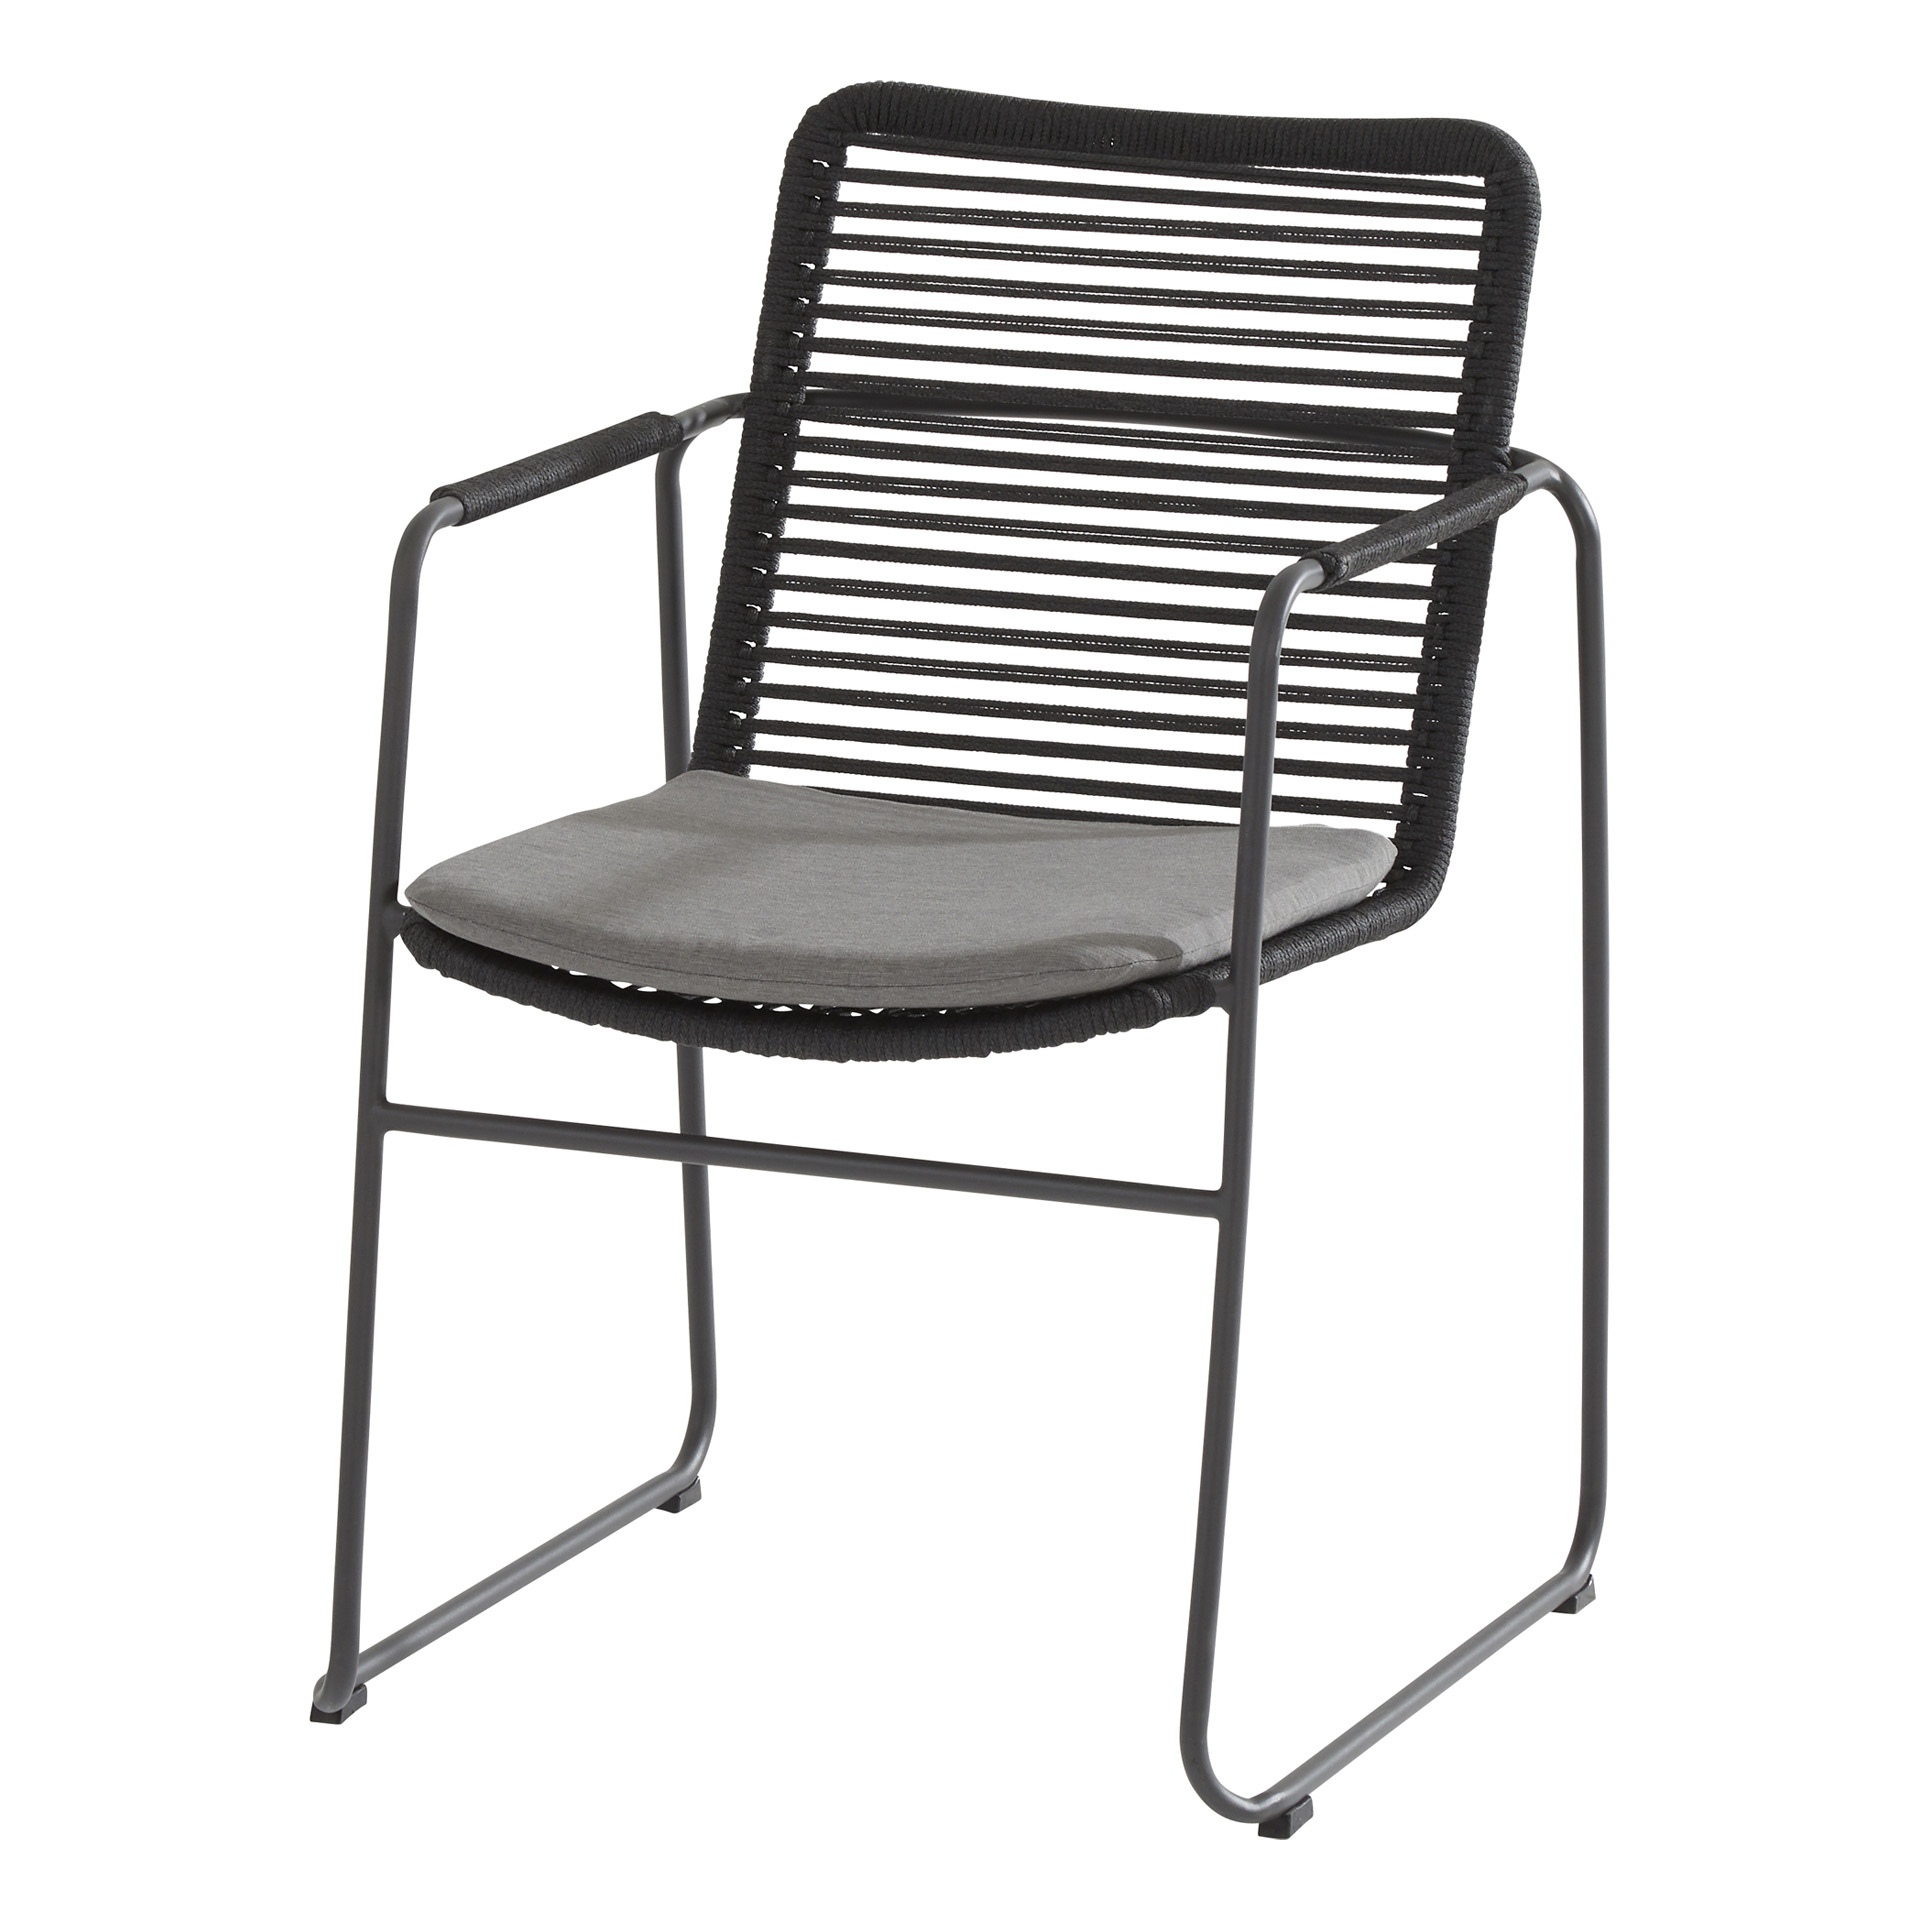 Elba stacking chair rope mid grey with cushion 